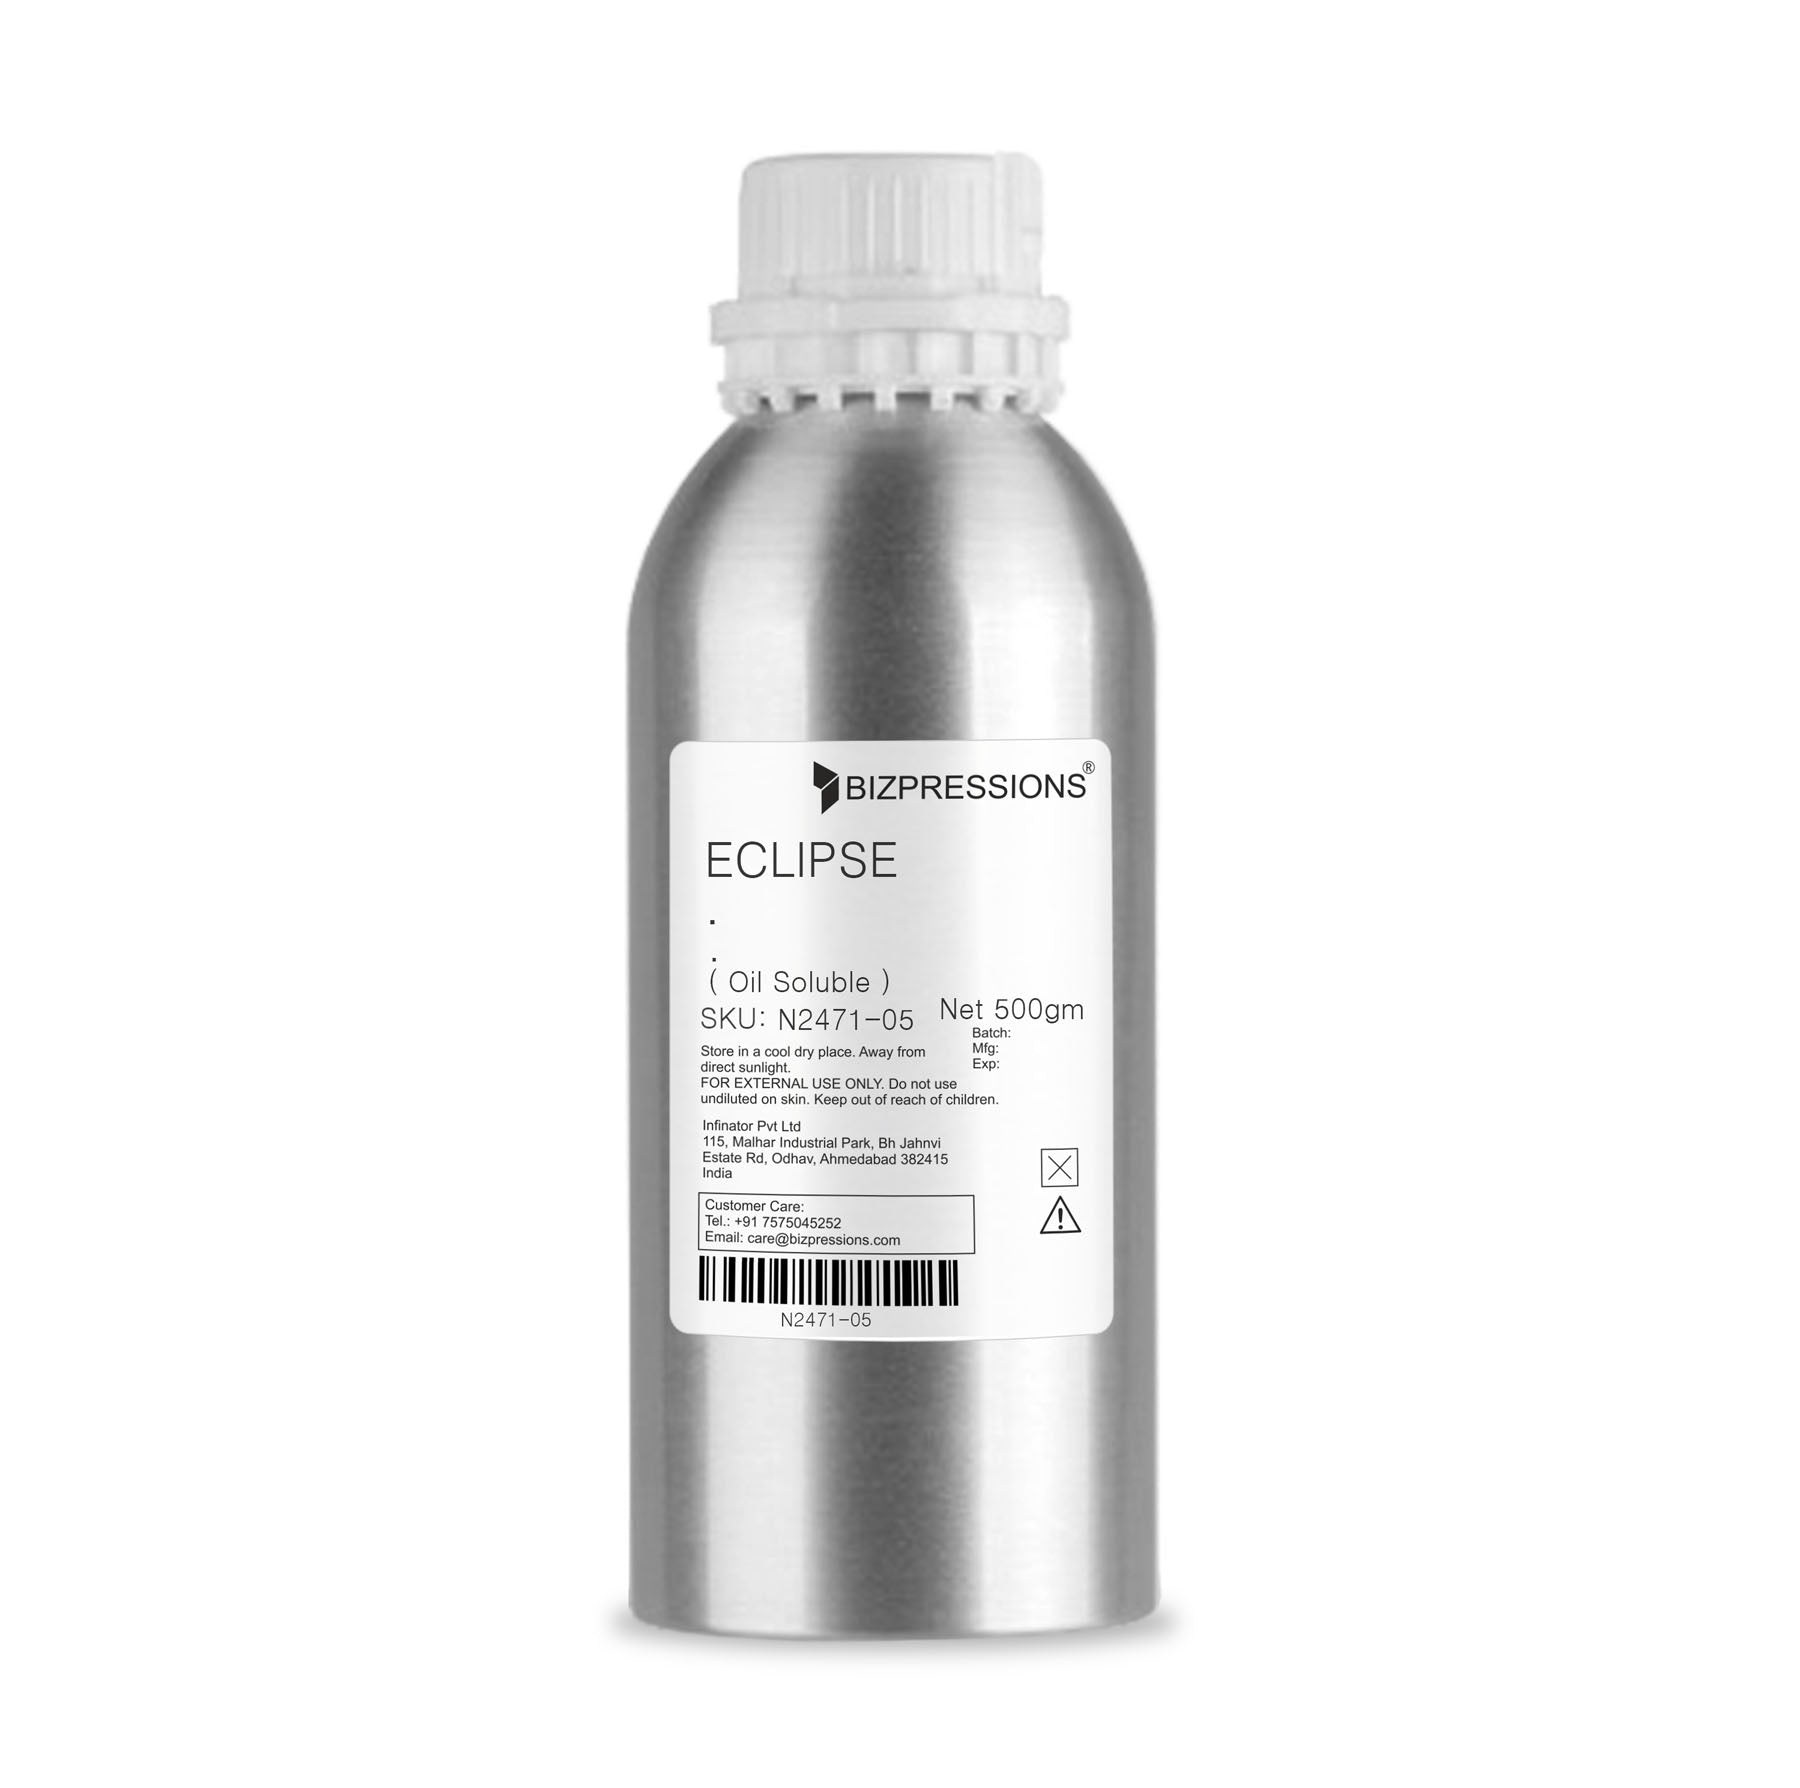 ECLIPSE - Fragrance ( Oil Soluble ) - 500 gm